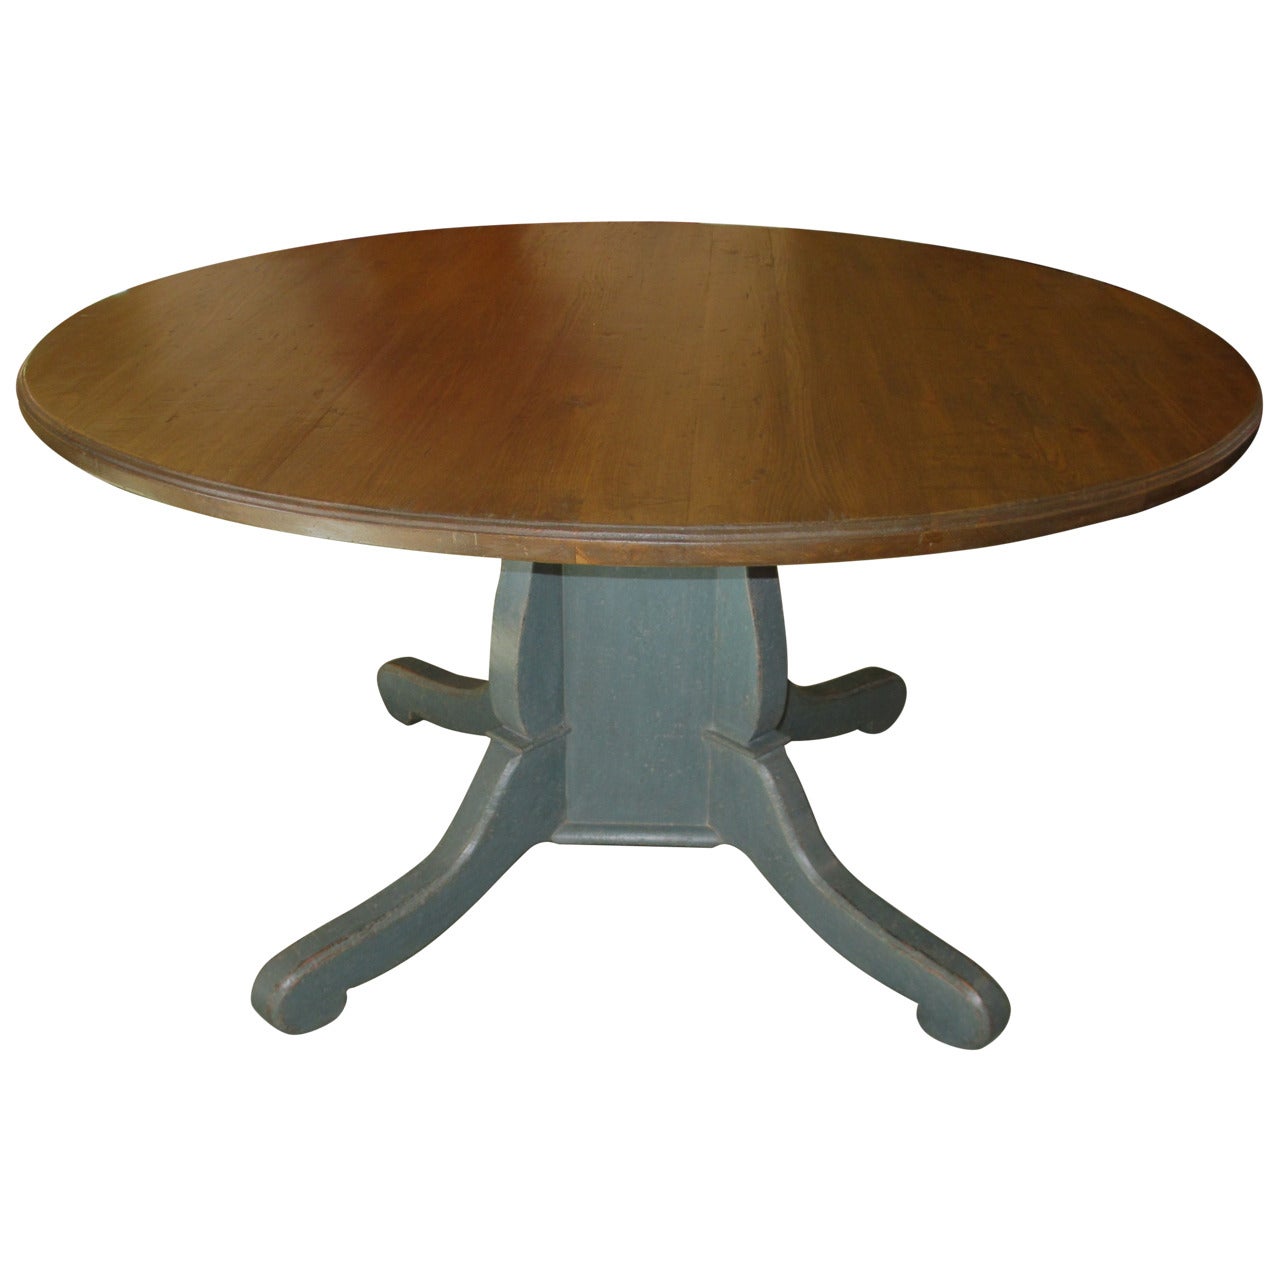 Round Pedestal Dining Table From Quebec